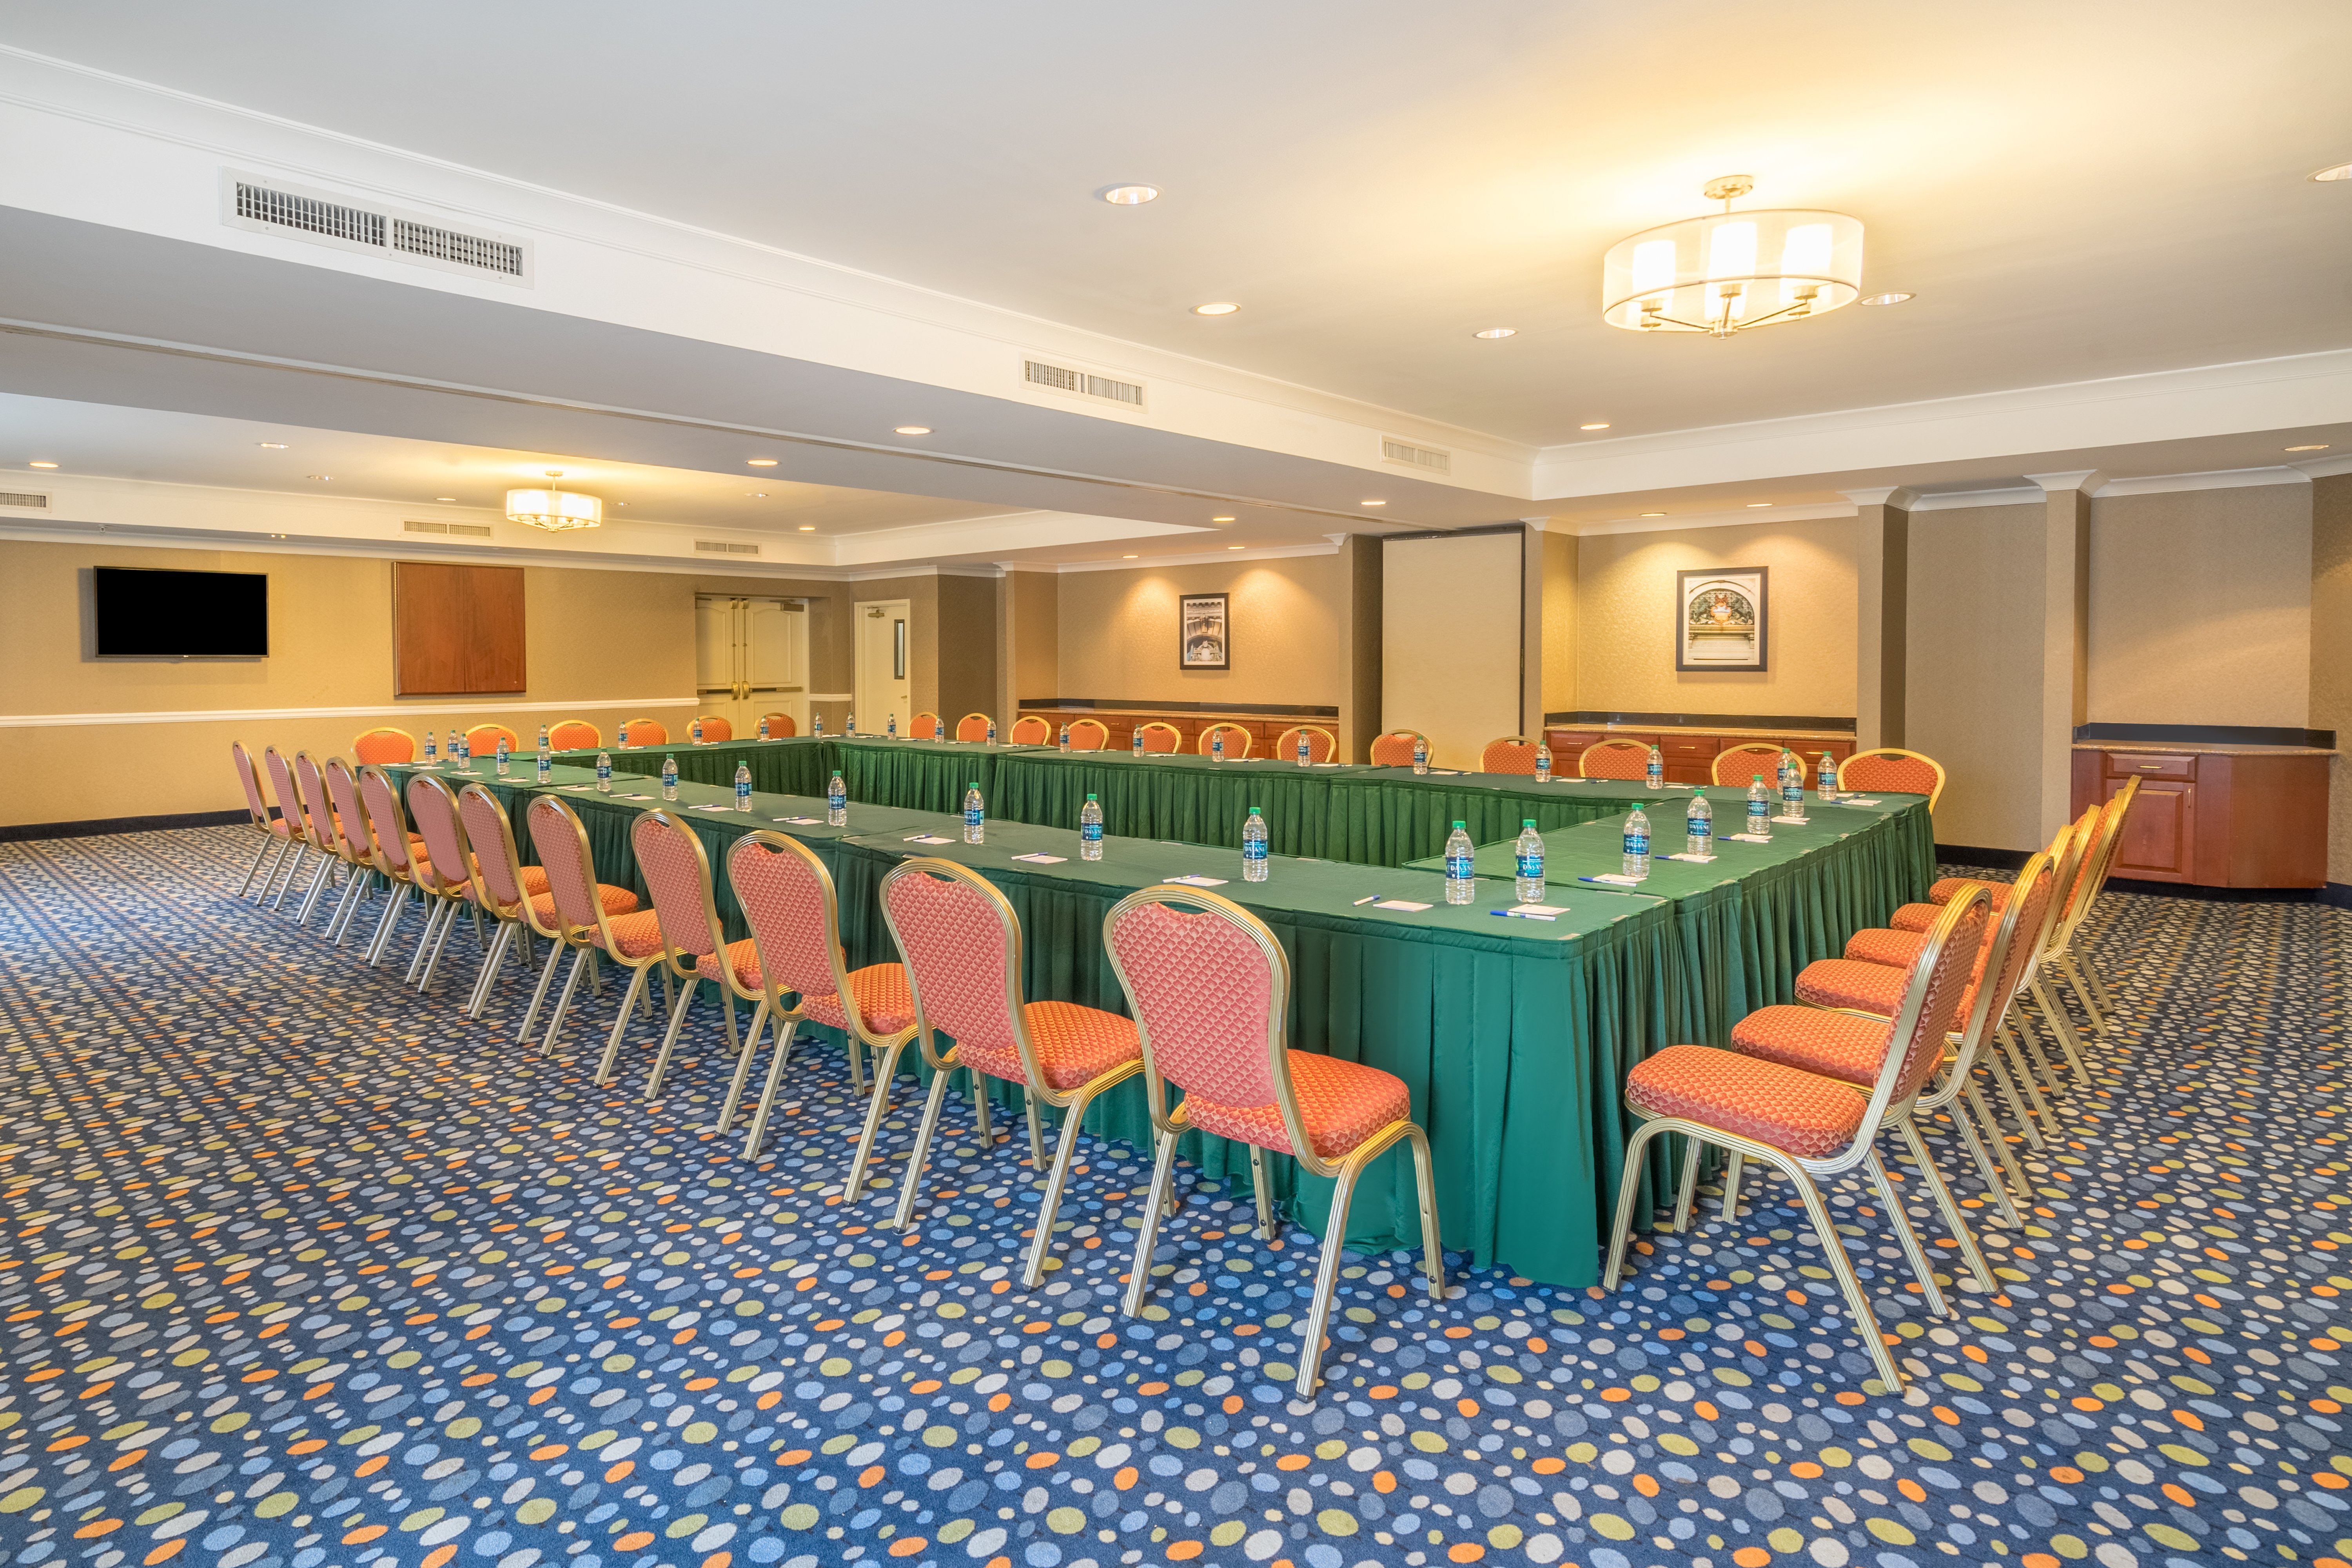 RENT THIS SPACIOUS ROOM FOR YOU NEXT BUSINESS MEETING.